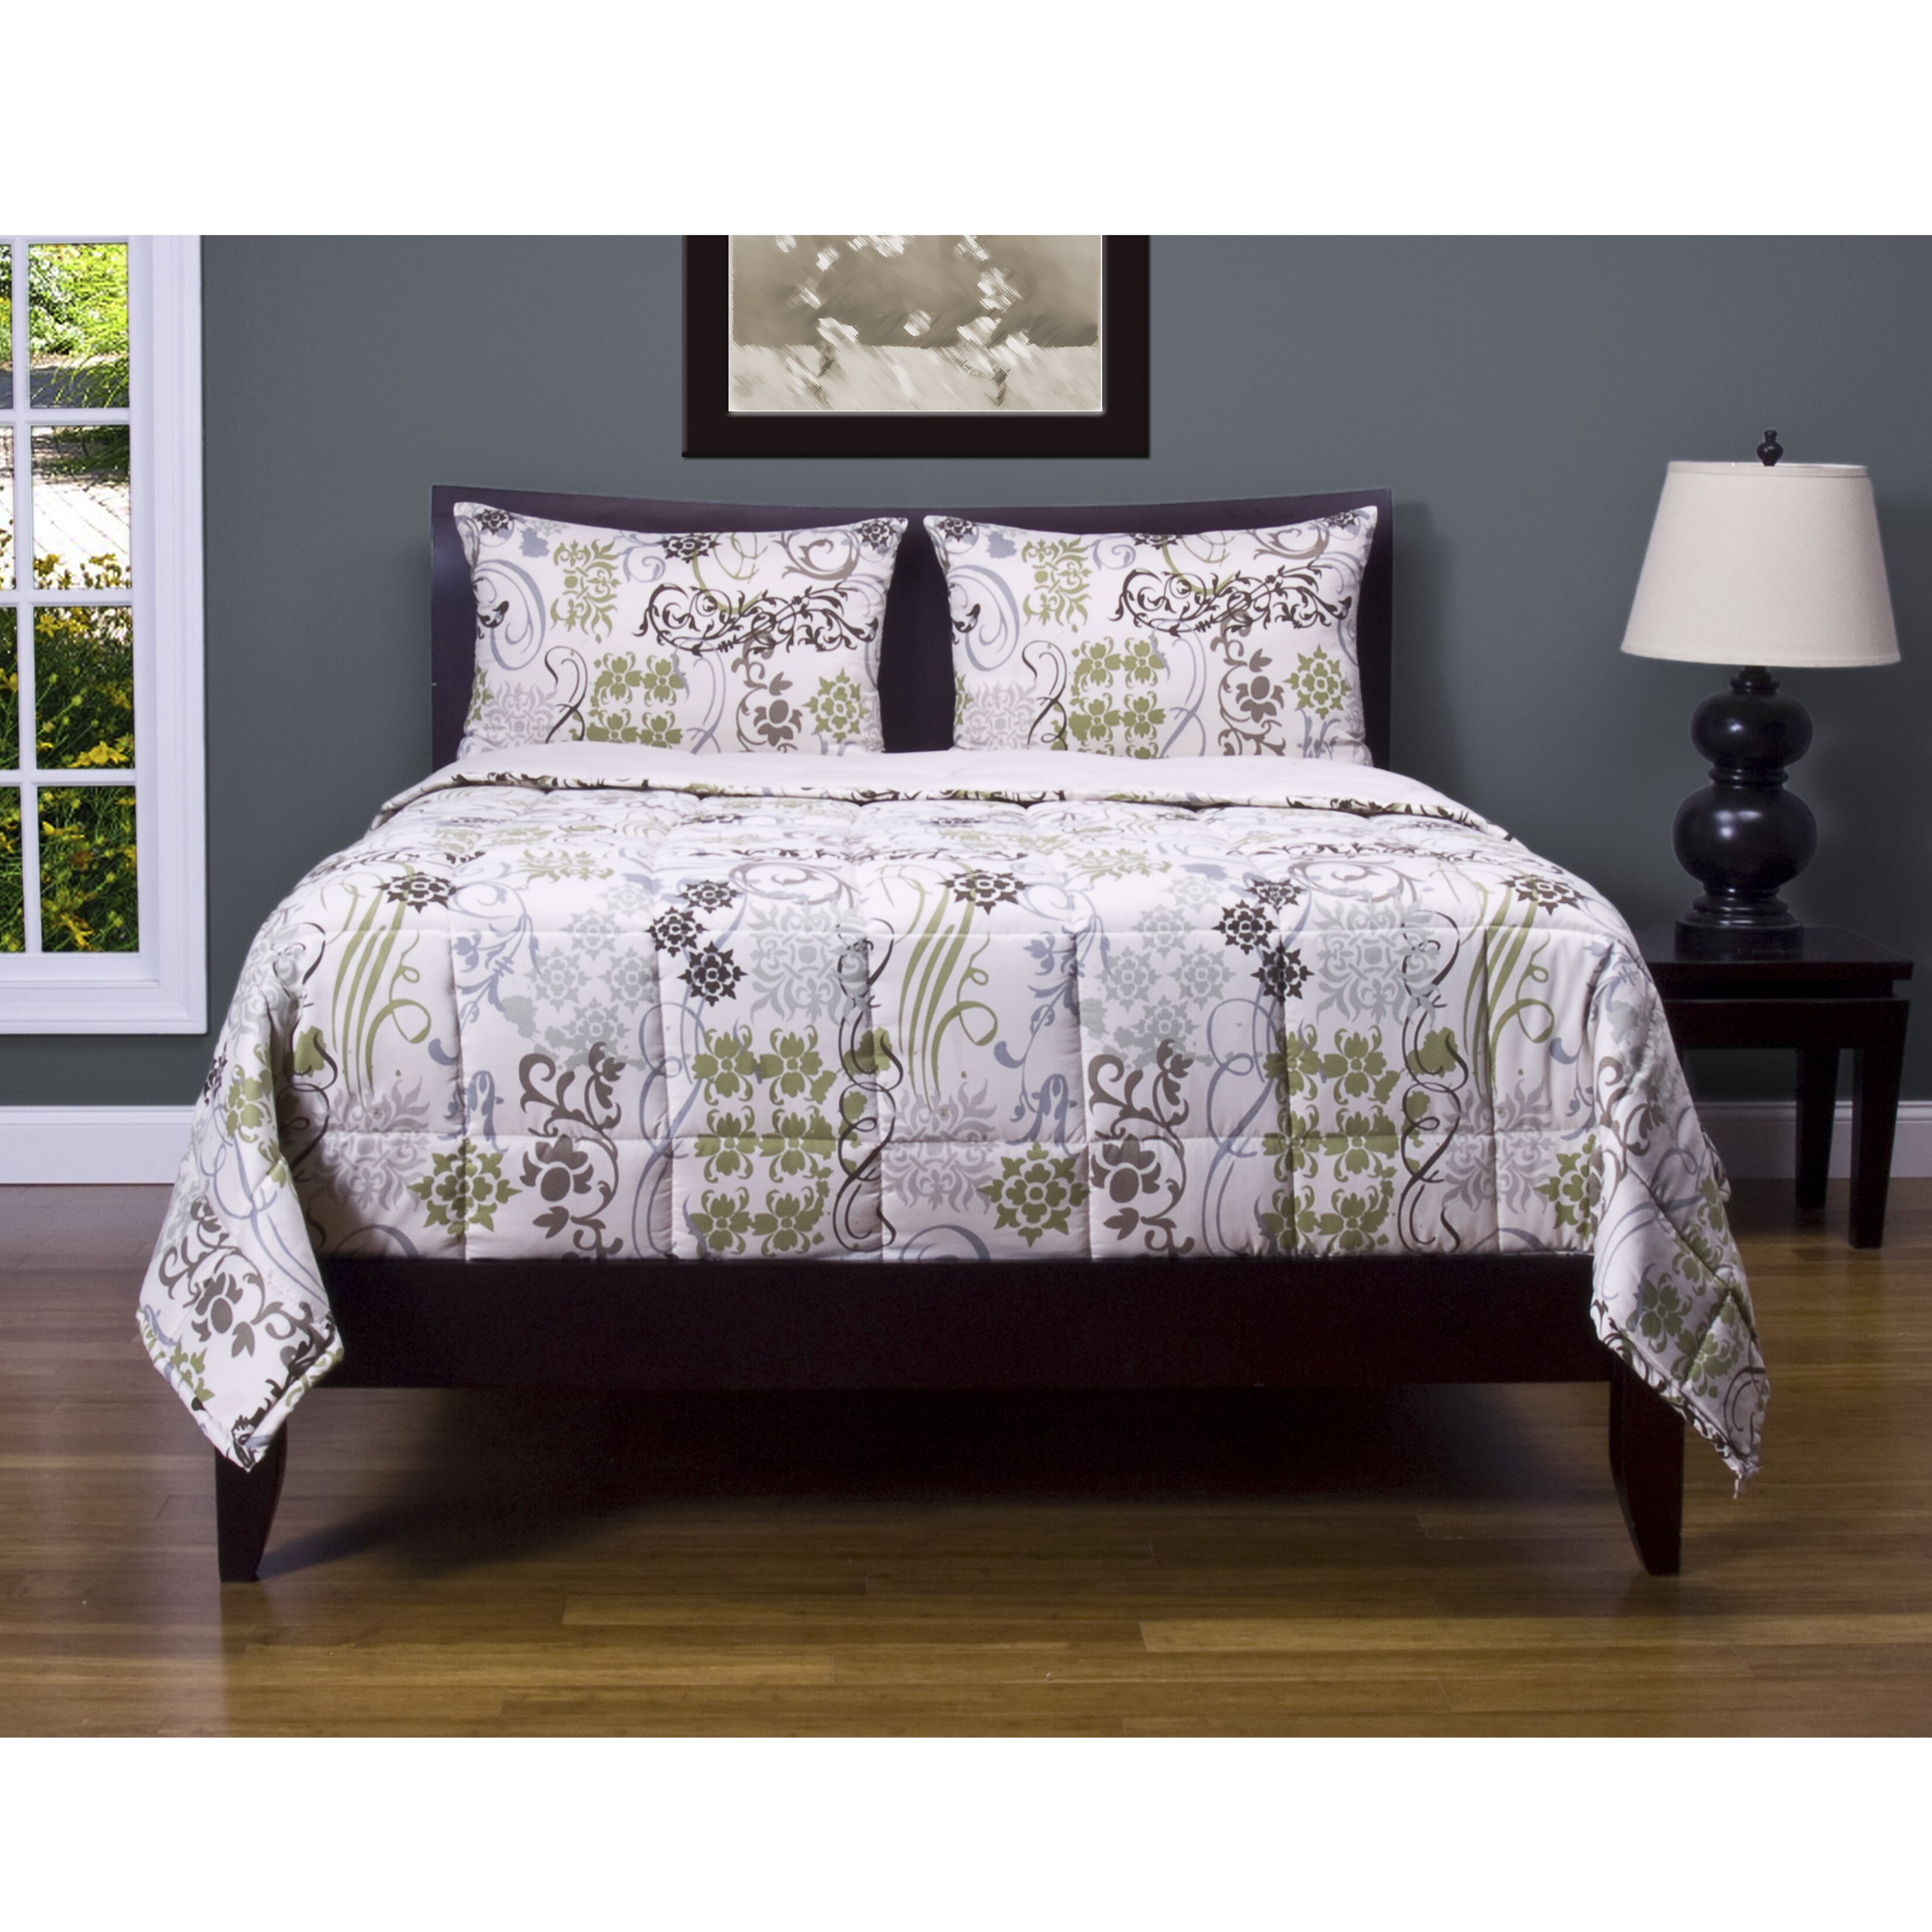 Ornamental 3 piece Comforter Set (Thyme green, deep cornflower blue, truffle brown, soft mint, creamy off white Materials 100 percent polyester Care instructions Machine wash cold, tumble dry low Queen DimensionsComforter 94 inches wide x 98 inches lon